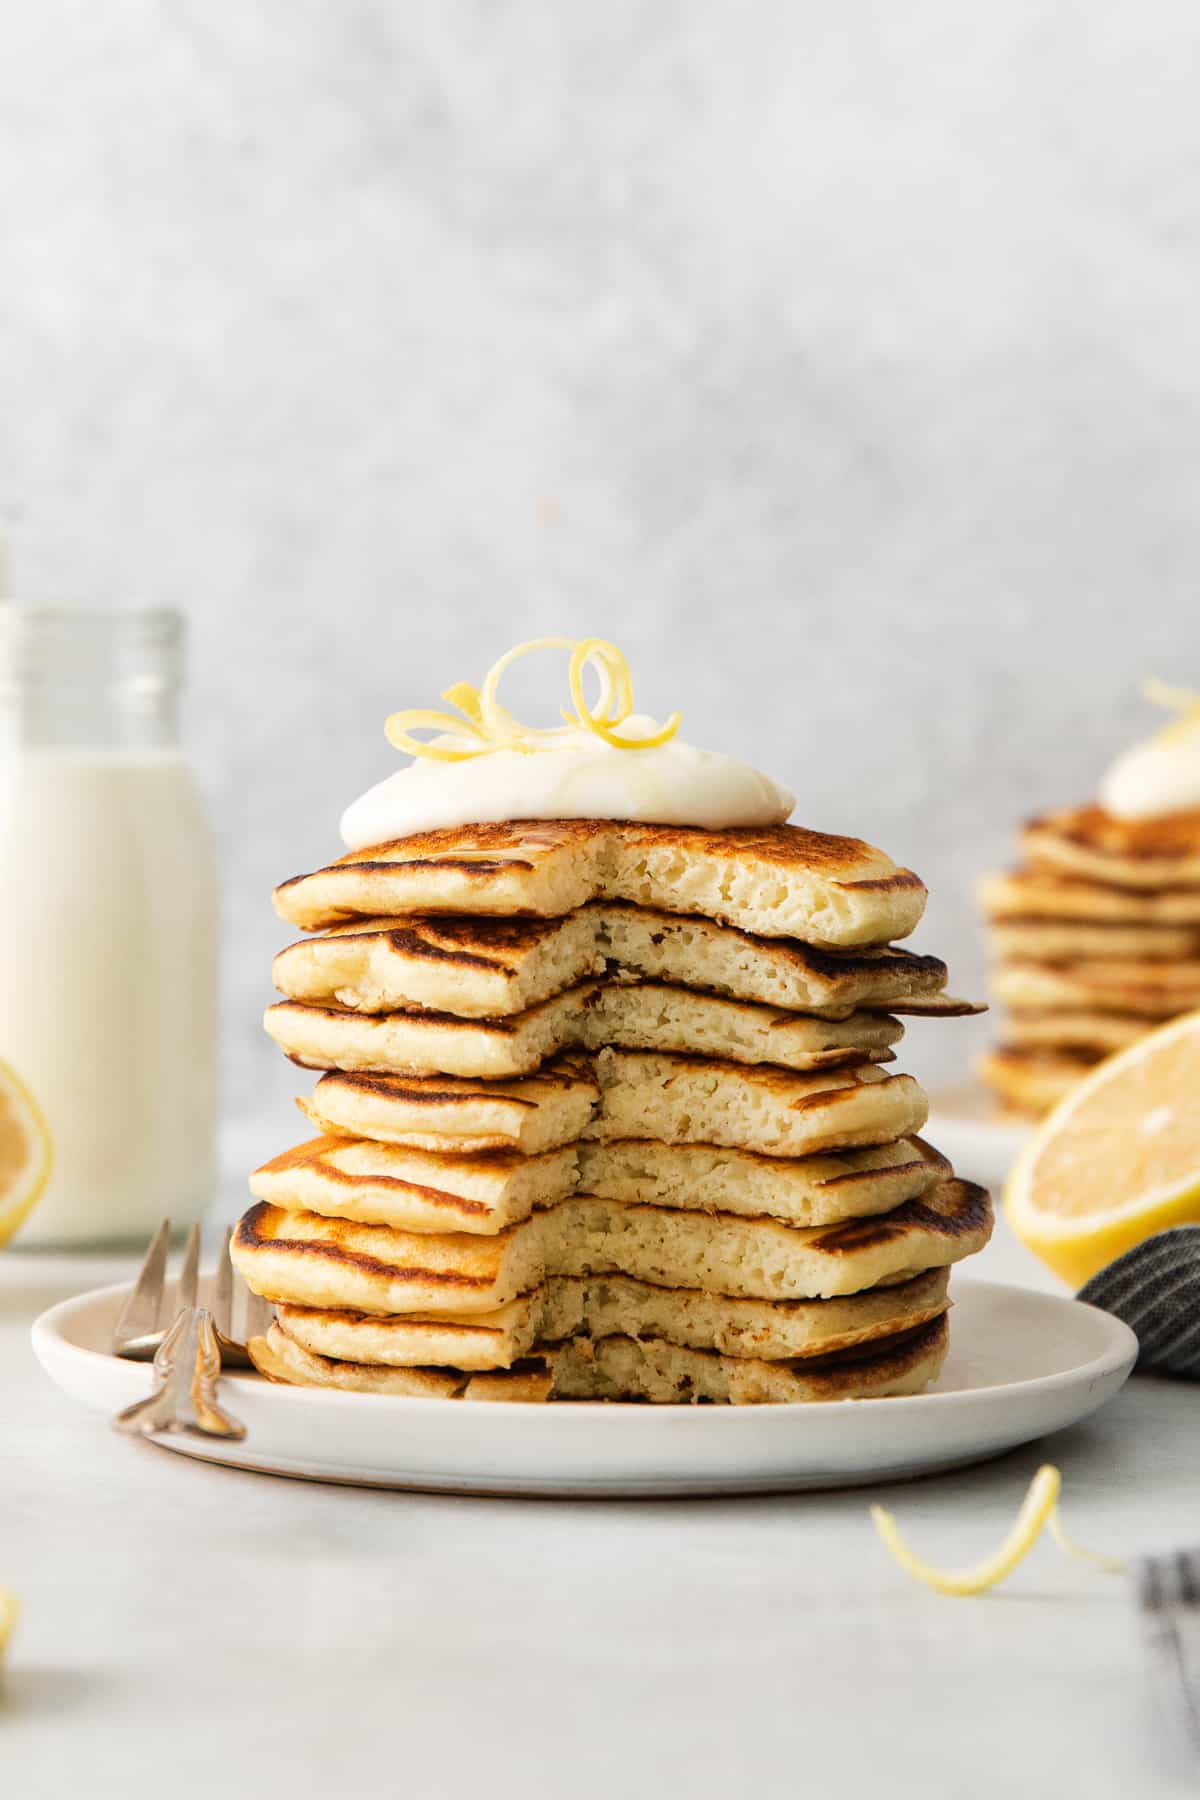 Lemon ricotta pancakes stacked on a plate.